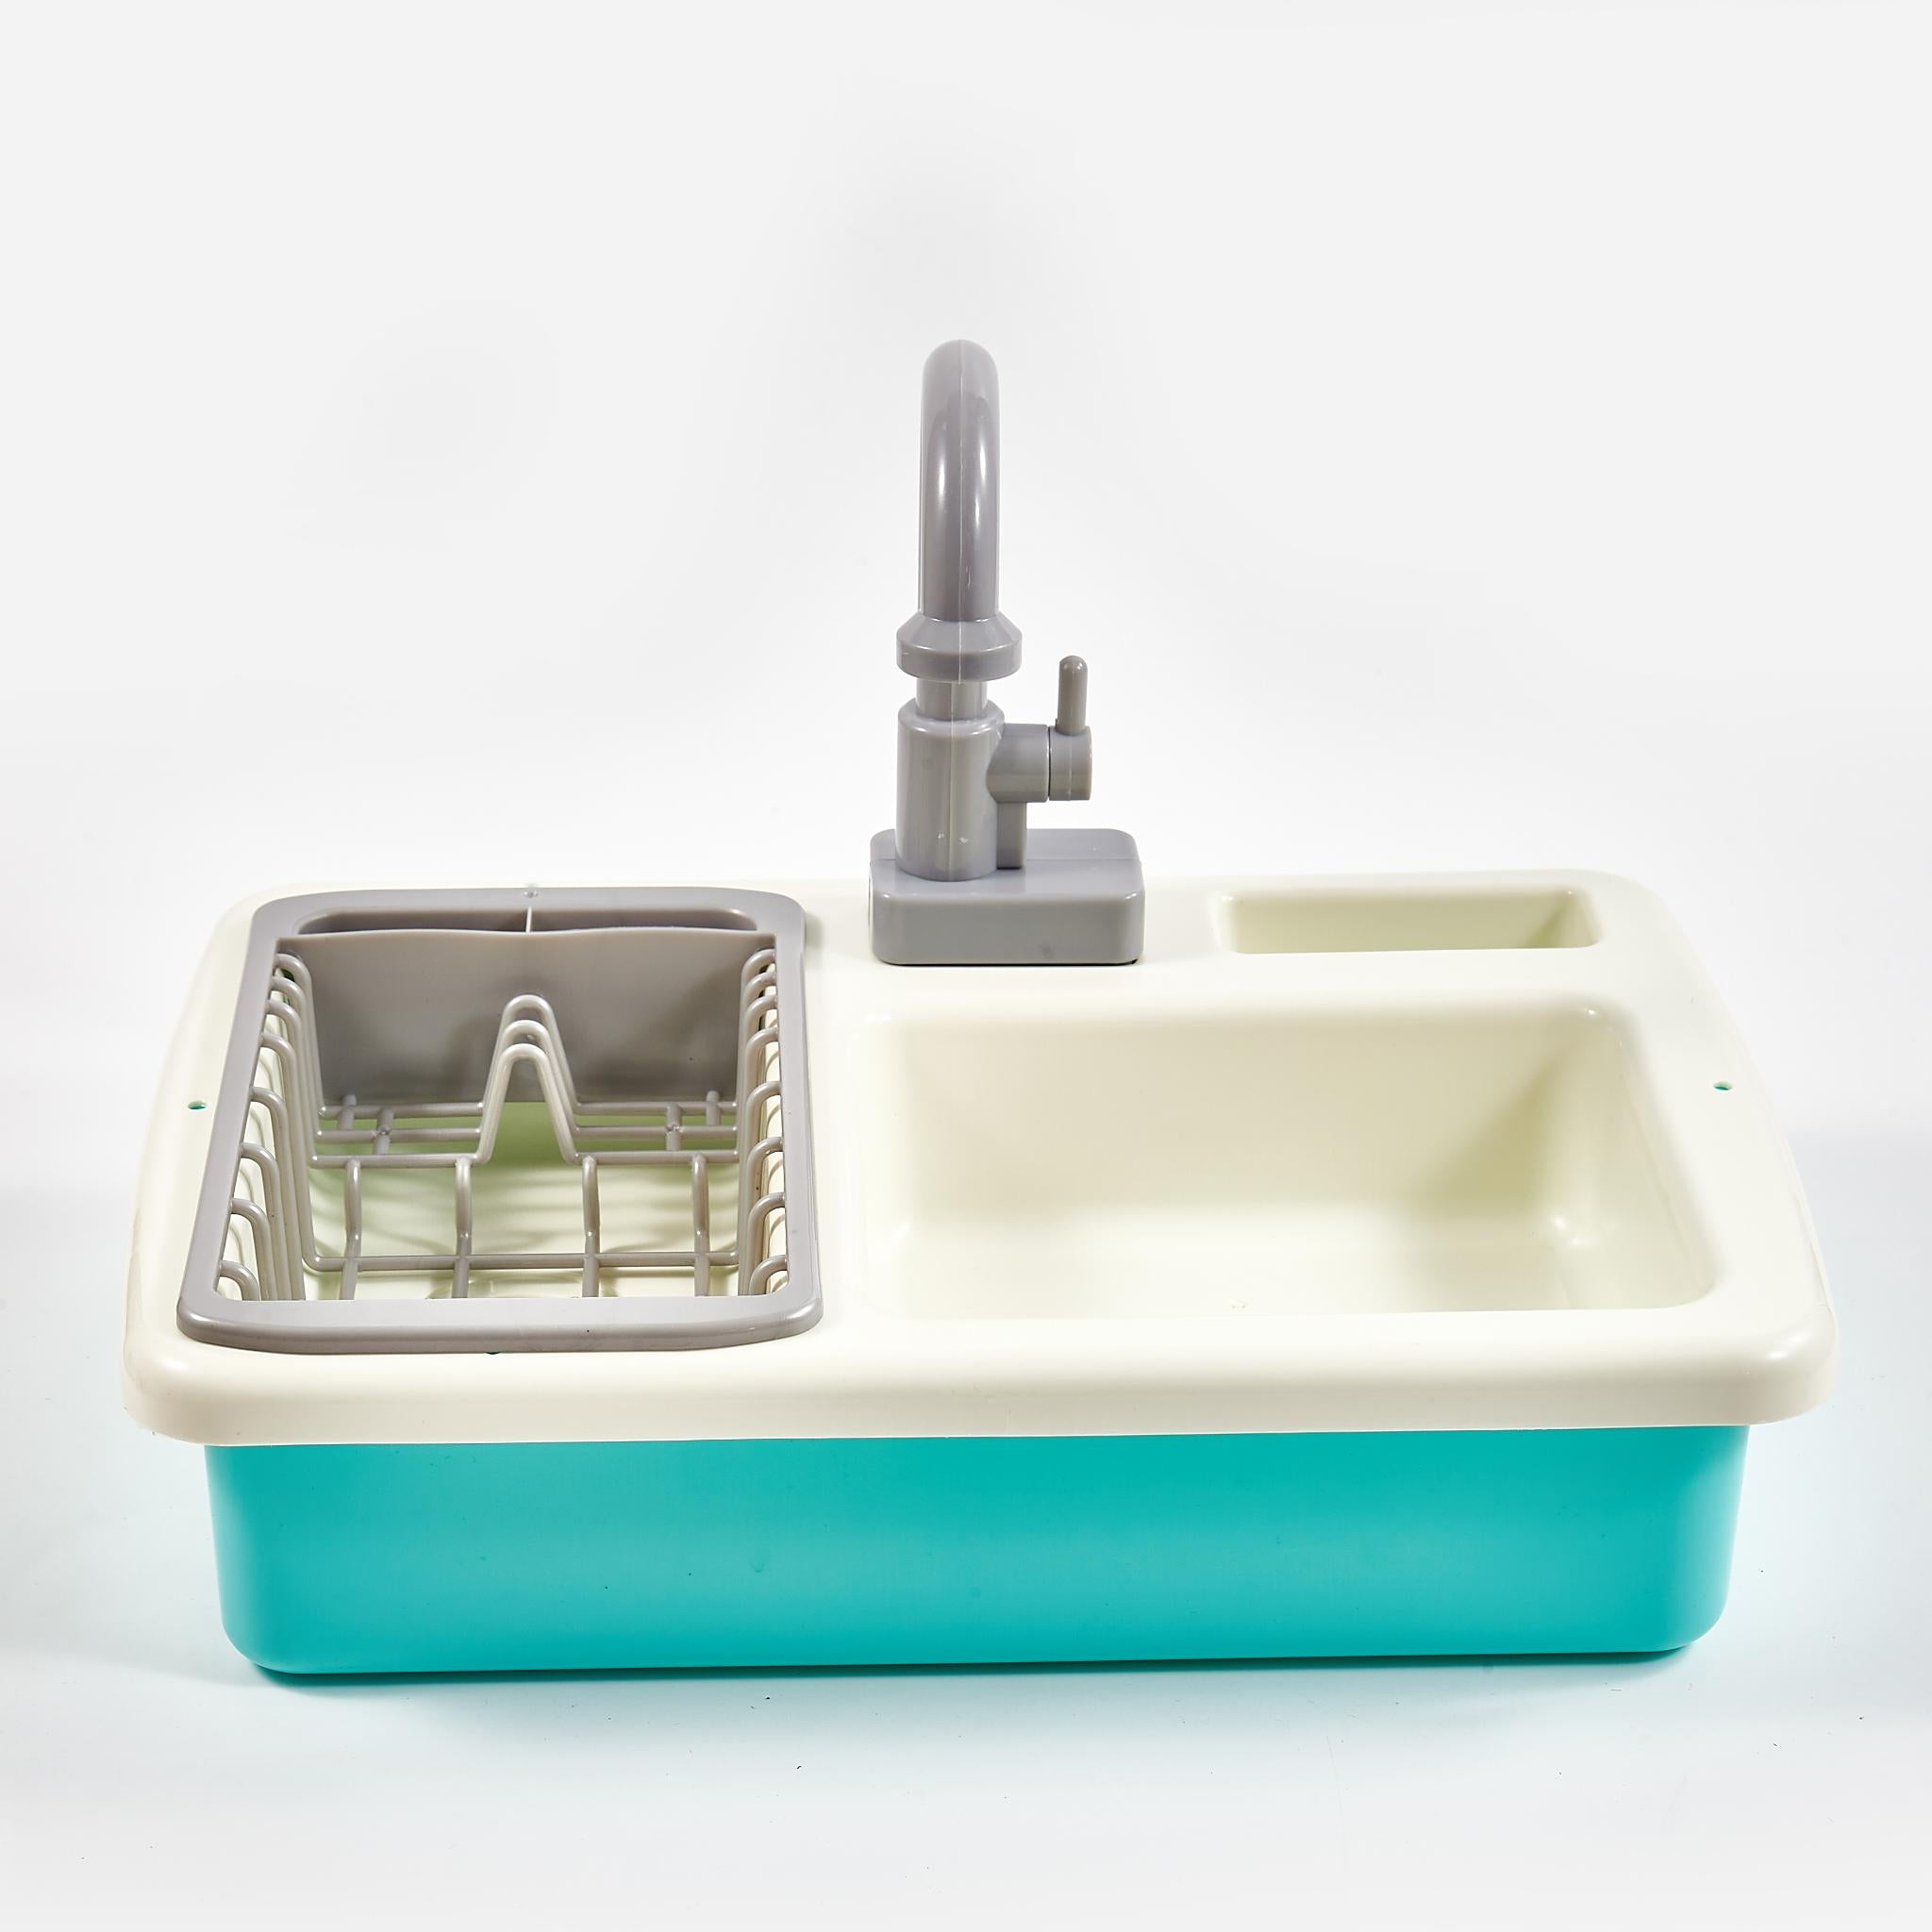 Sustainable kitchen sink including dishes